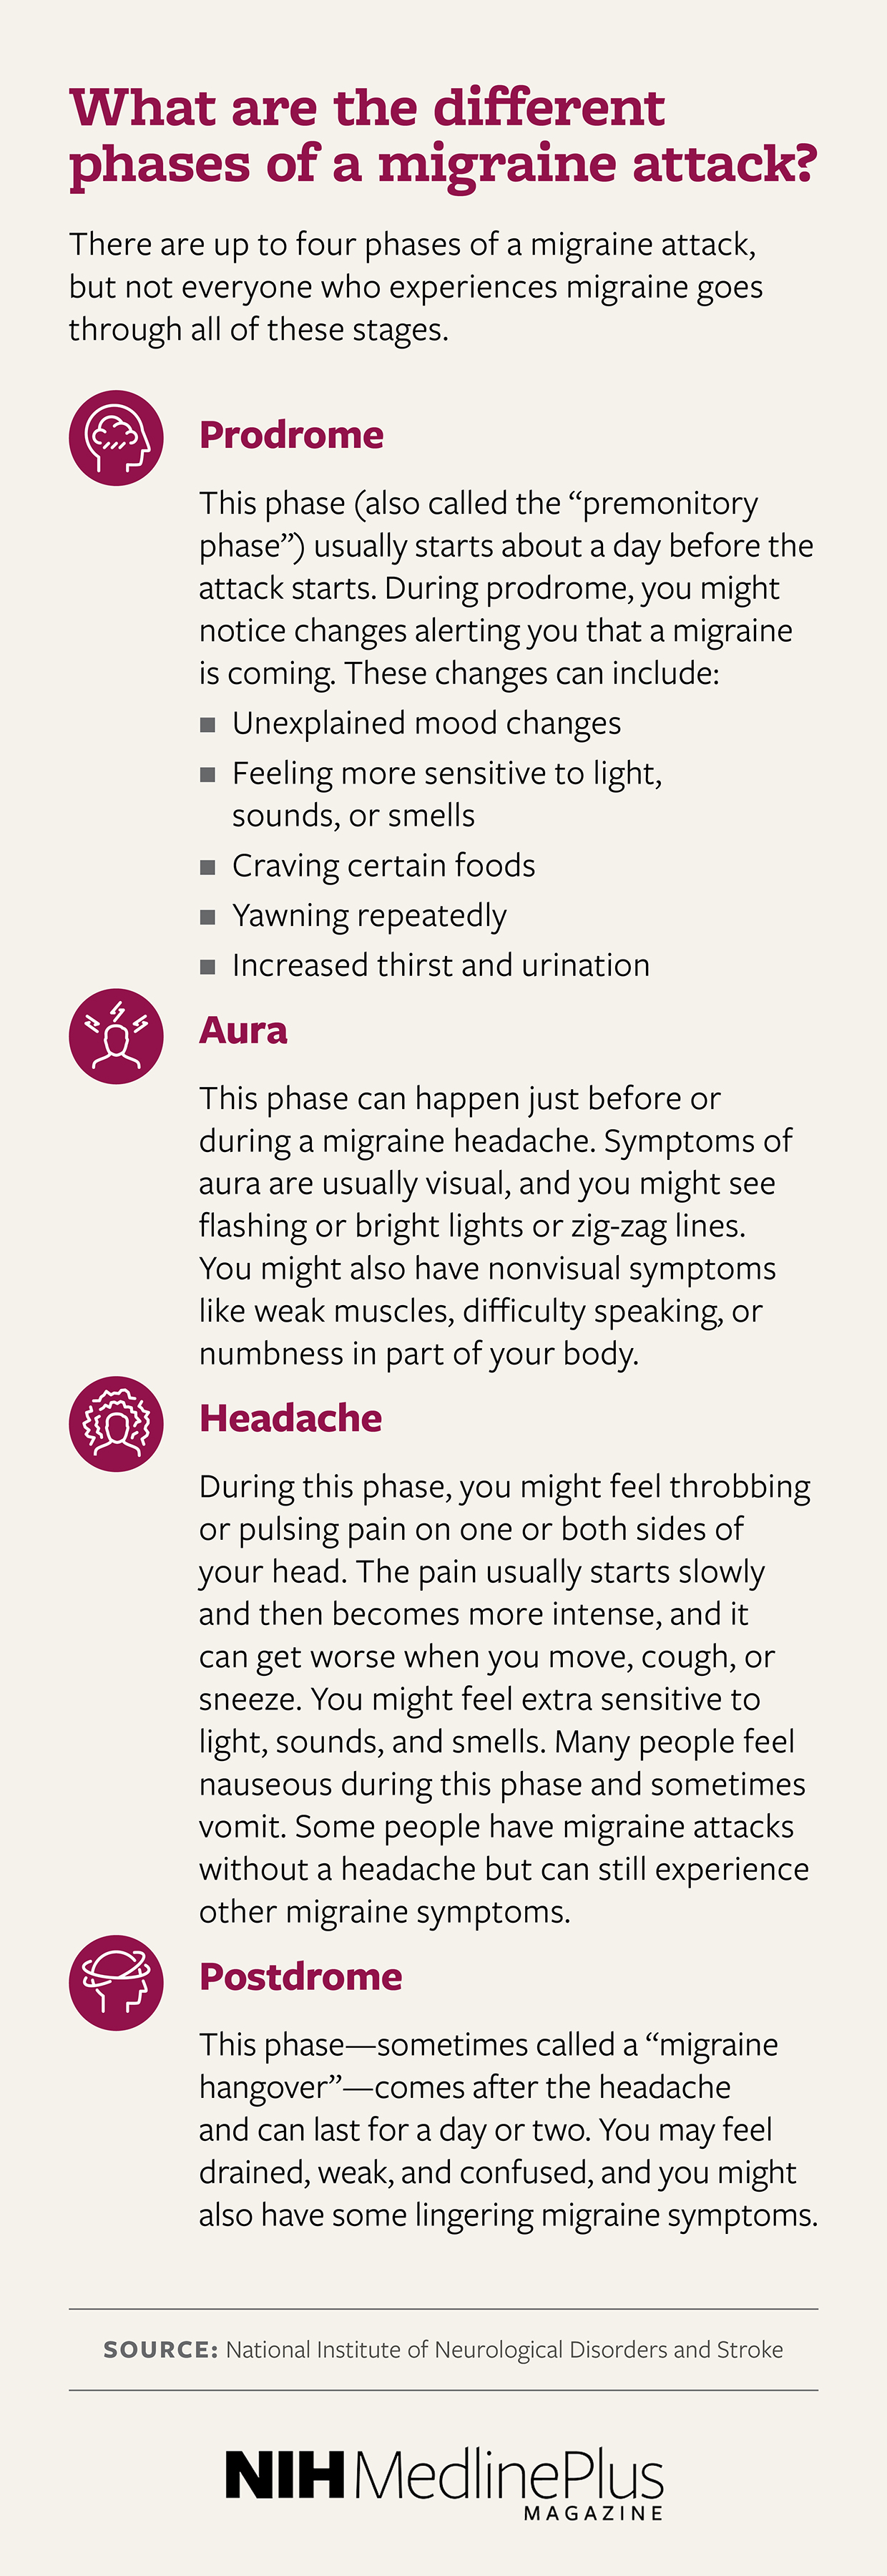 What are the different phases of a migraine attack?     
There are up to four phases of a migraine attack, but not everyone who experiences migraine goes through all of these stages.
Prodrome
This phase (also called the “premonitory phase”) usually starts about a day before the attack starts. During prodrome, you might notice changes alerting you that a migraine is coming. These changes can include: 
Unexplained mood changes
Feeling more sensitive to light, sounds, or smells
Craving certain foods
Yawning repeatedly
Increased thirst and urination
Aura
This phase can happen just before or during a migraine headache. Symptoms of aura are usually visual, and you might see flashing or bright lights or zig-zag lines. You might also have nonvisual symptoms like weak muscles, difficulty speaking, or numbness in part of your body. 
Headache
During this phase, you might feel throbbing or pulsing pain on one or both sides of your head. The pain usually starts slowly and then becomes more intense, and it can get worse when you move, cough, or sneeze. You might feel extra sensitive to light, sounds, and smells. Many people feel nauseous during this phase and sometimes vomit. Some people have migraine attacks without a headache but can still experience other migraine symptoms. 
Postdrome 
This phase―sometimes called a “migraine hangover”―comes after the headache and can last for a day or two. You may feel drained, weak, and confused, and you might also have some lingering migraine symptoms.
 
 
    